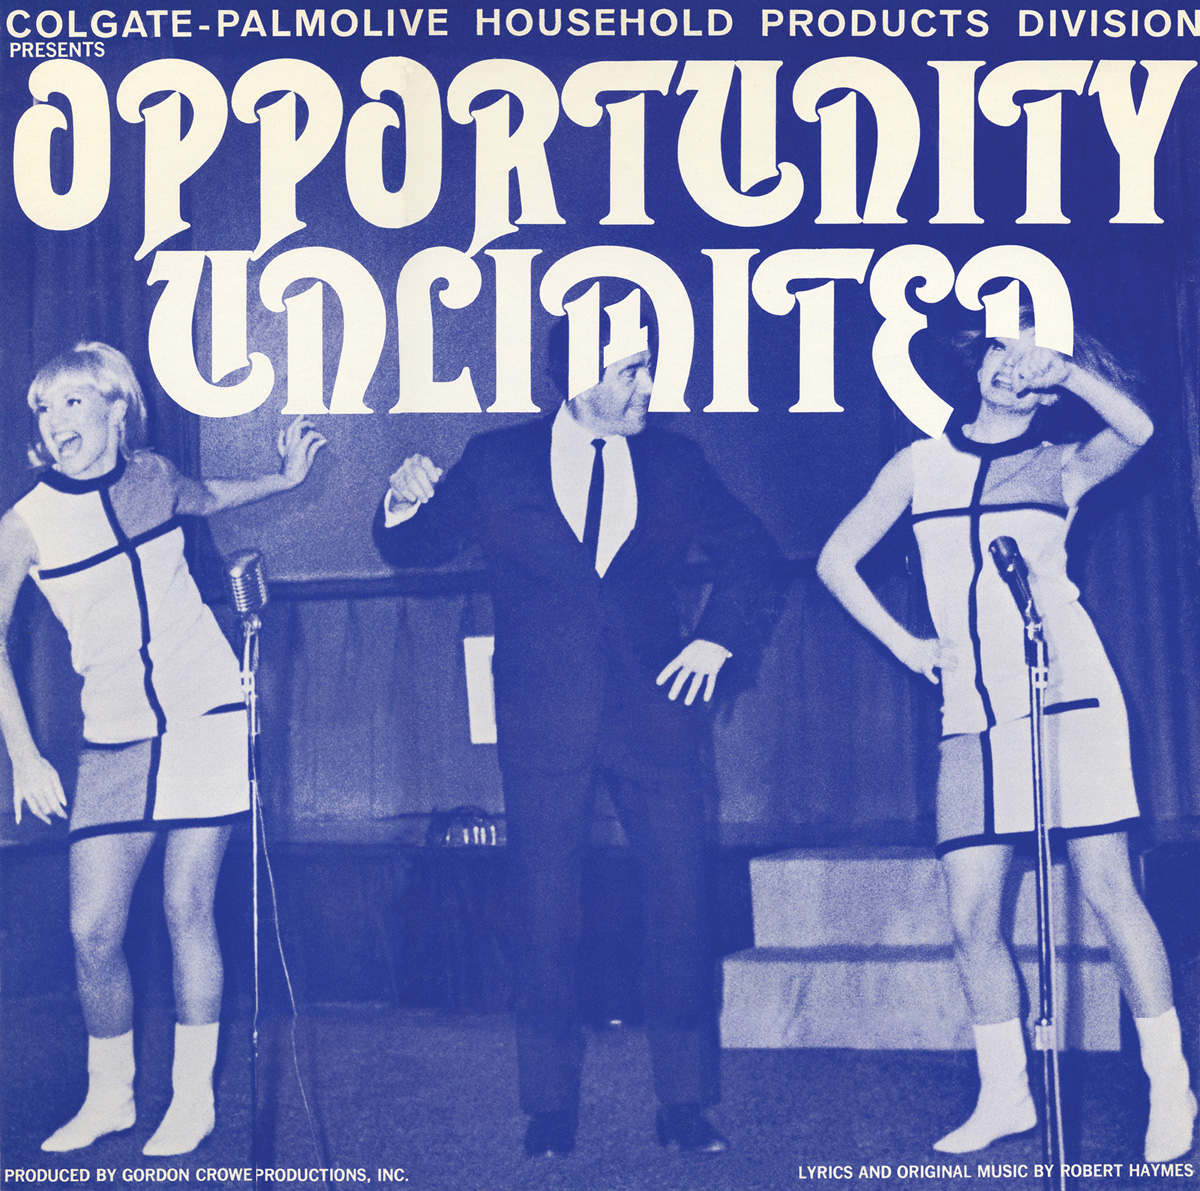 An album cover from 1965 for a Colgate-Palmolive Household Products Division show titled “Opportunity Unlimited.”